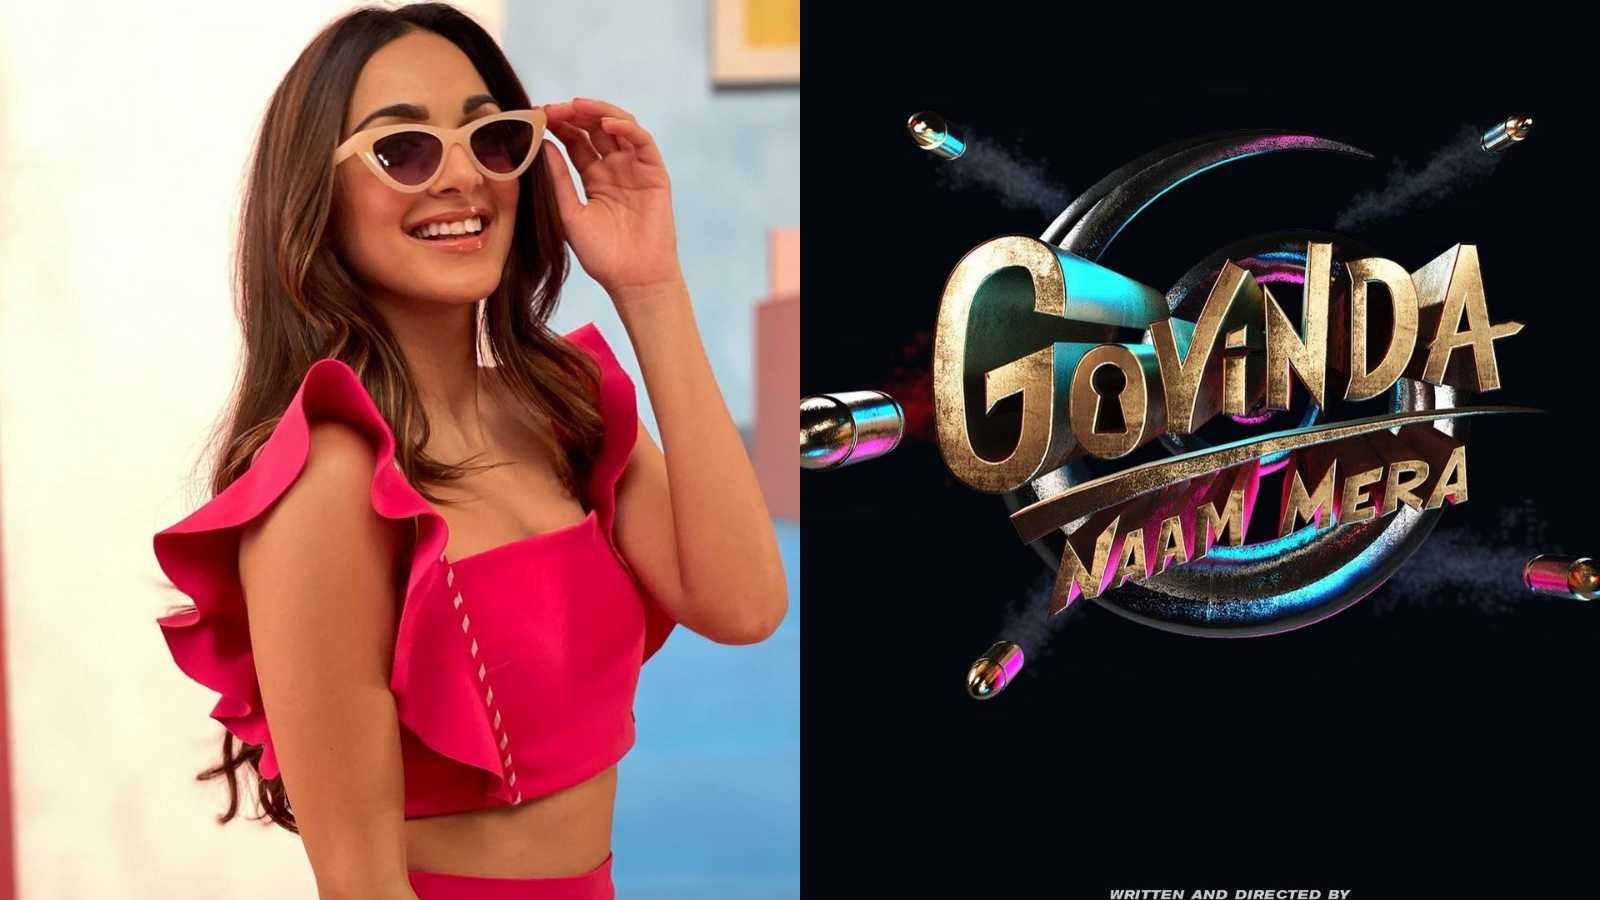 Kiara Advani calls her upcoming film Govinda Mera Naam 'trippy', says, 'I still have to figure out the name of the genre'